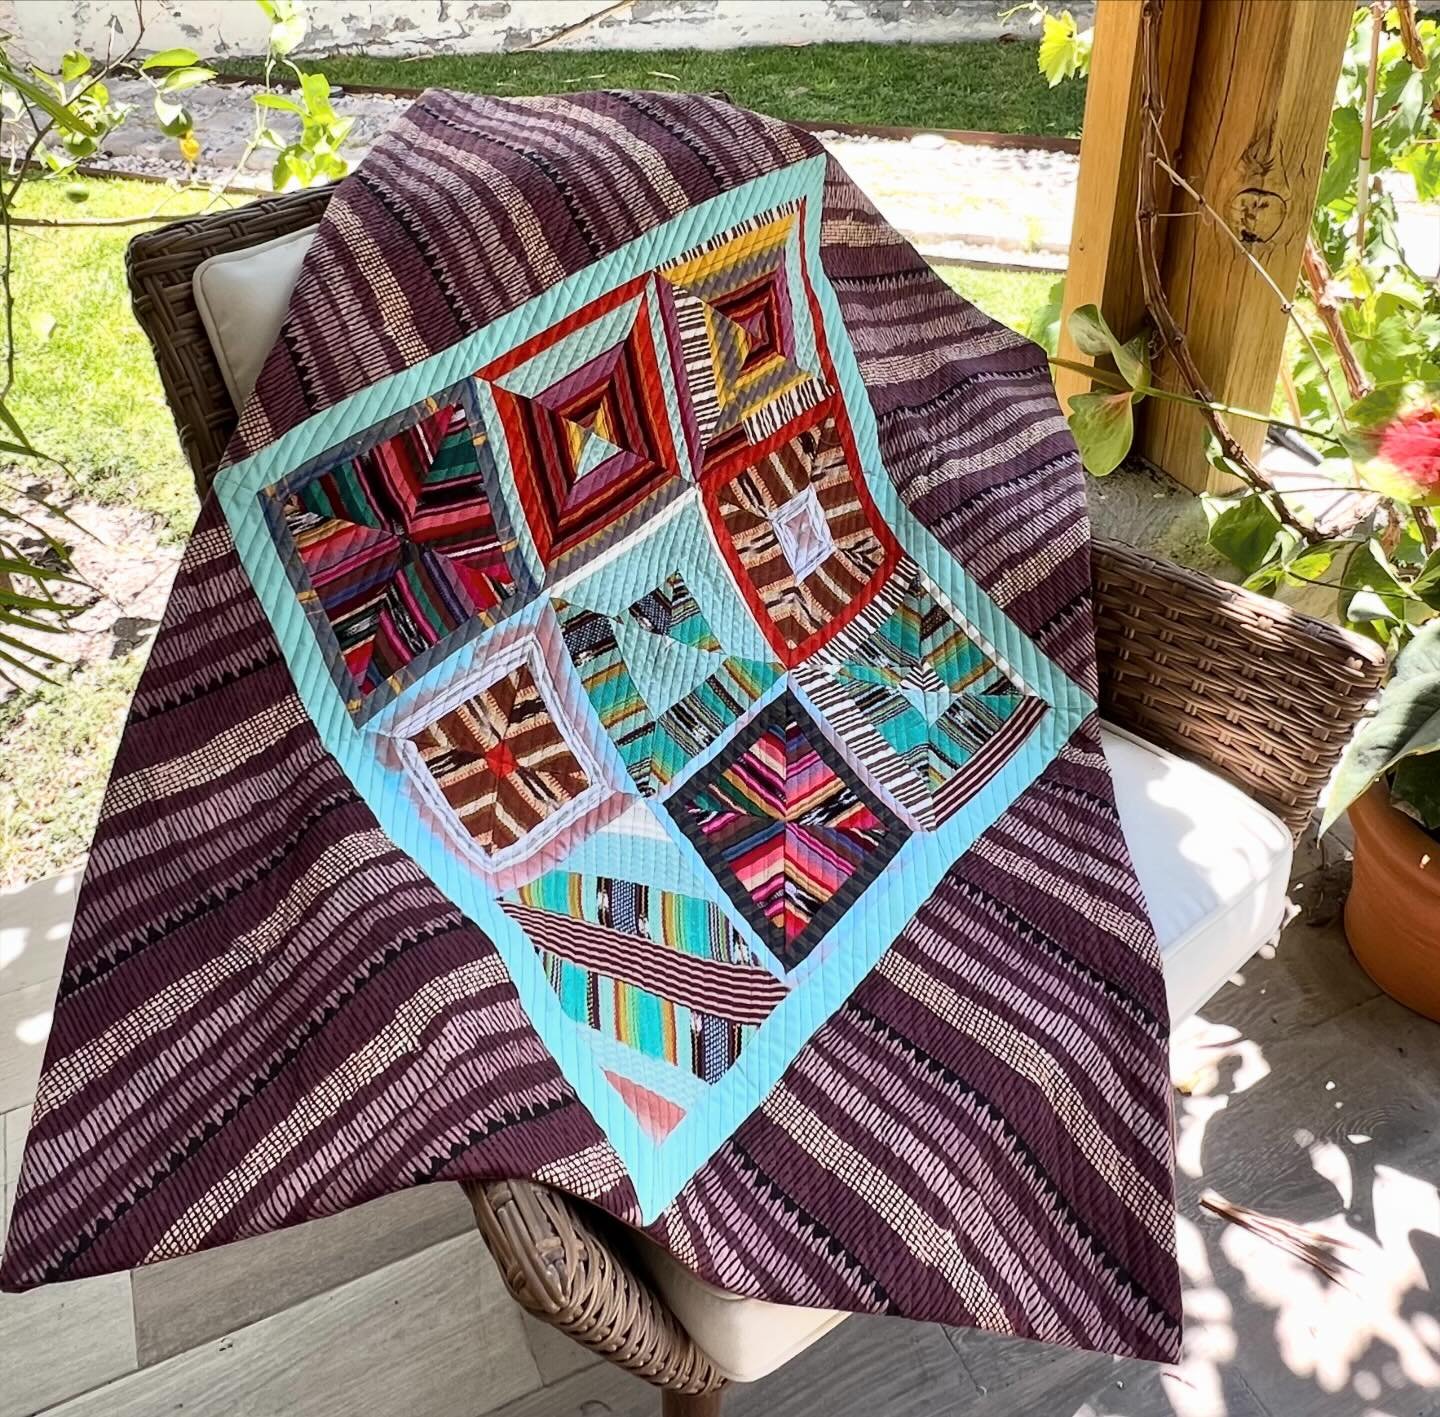 A very productive weekend. Yesterday I did the quilting and today the faced  binding for this small quilt I made during Priscilla Bianchi&rsquo;s workshop: The Stripe Revolution. #priscillabianchiartquilts #mexicomqg